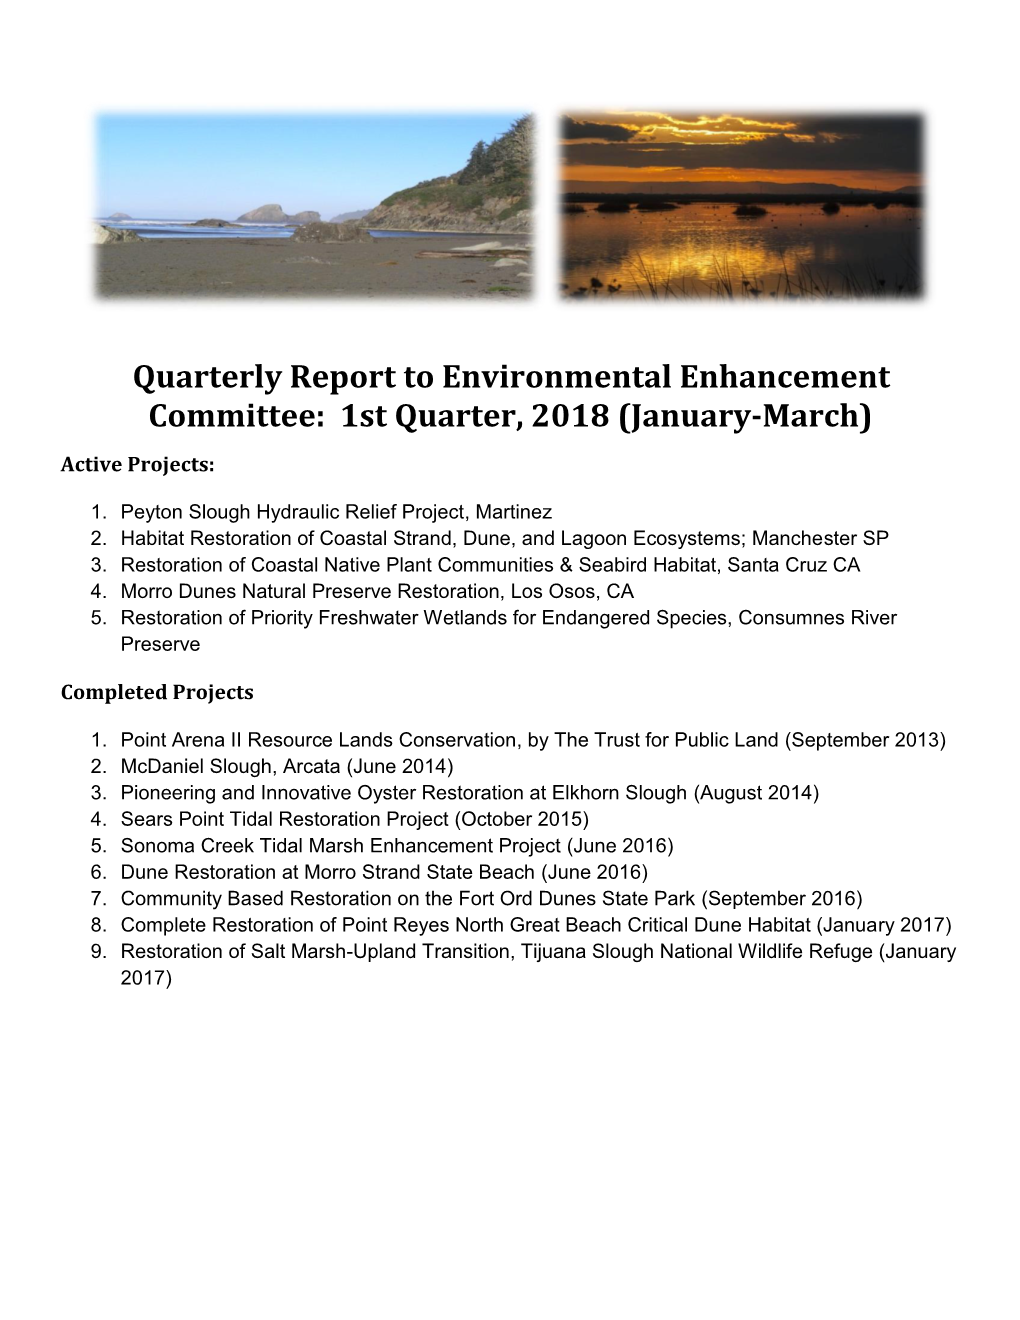 Quarterly Report to Environmental Enhancement Committeel 1St